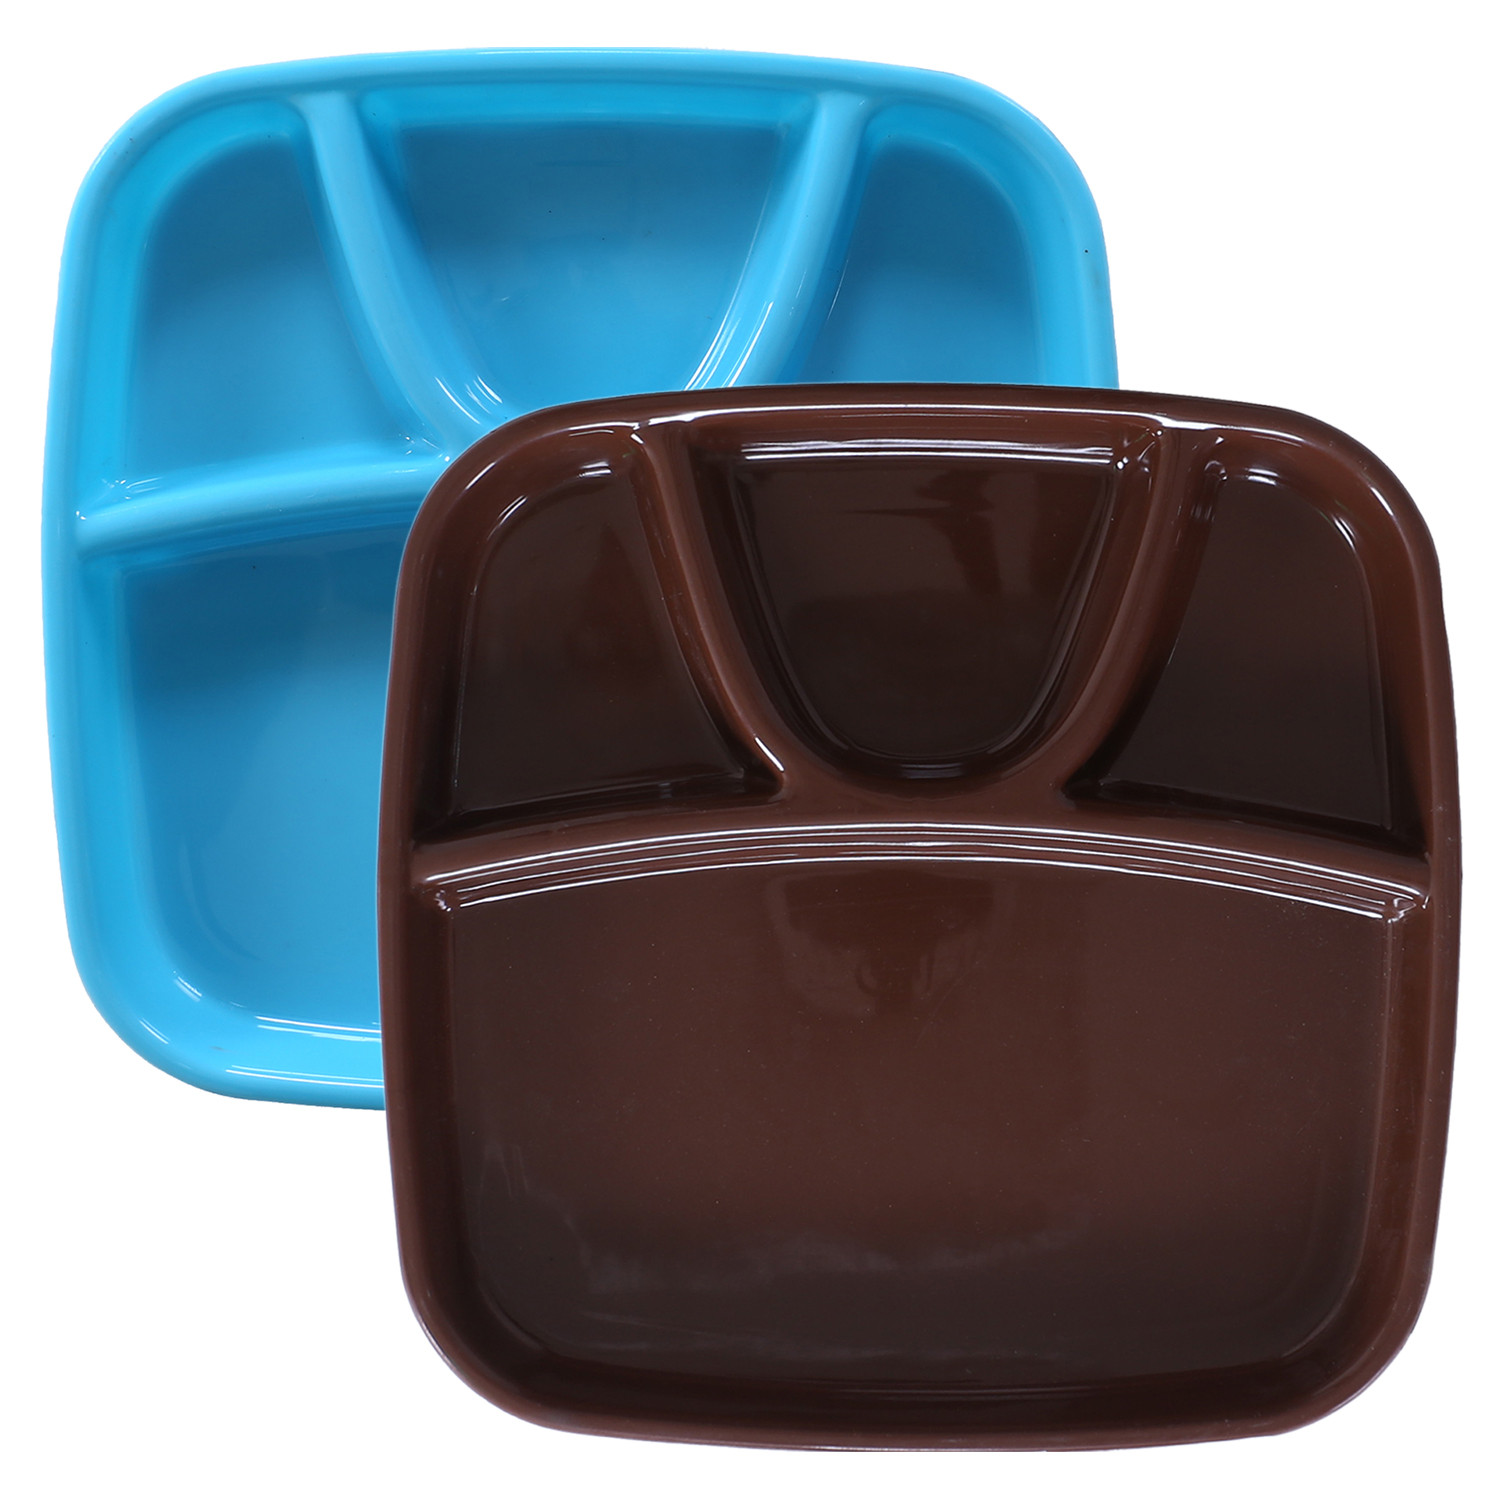 Kuber Industries Serving Plate|Plate Set For Dinner|Unbreakable Plastic Plates|Microwave Safe Plates|Food Organizer With 4 Partitions|(Sky Blue & Brown)